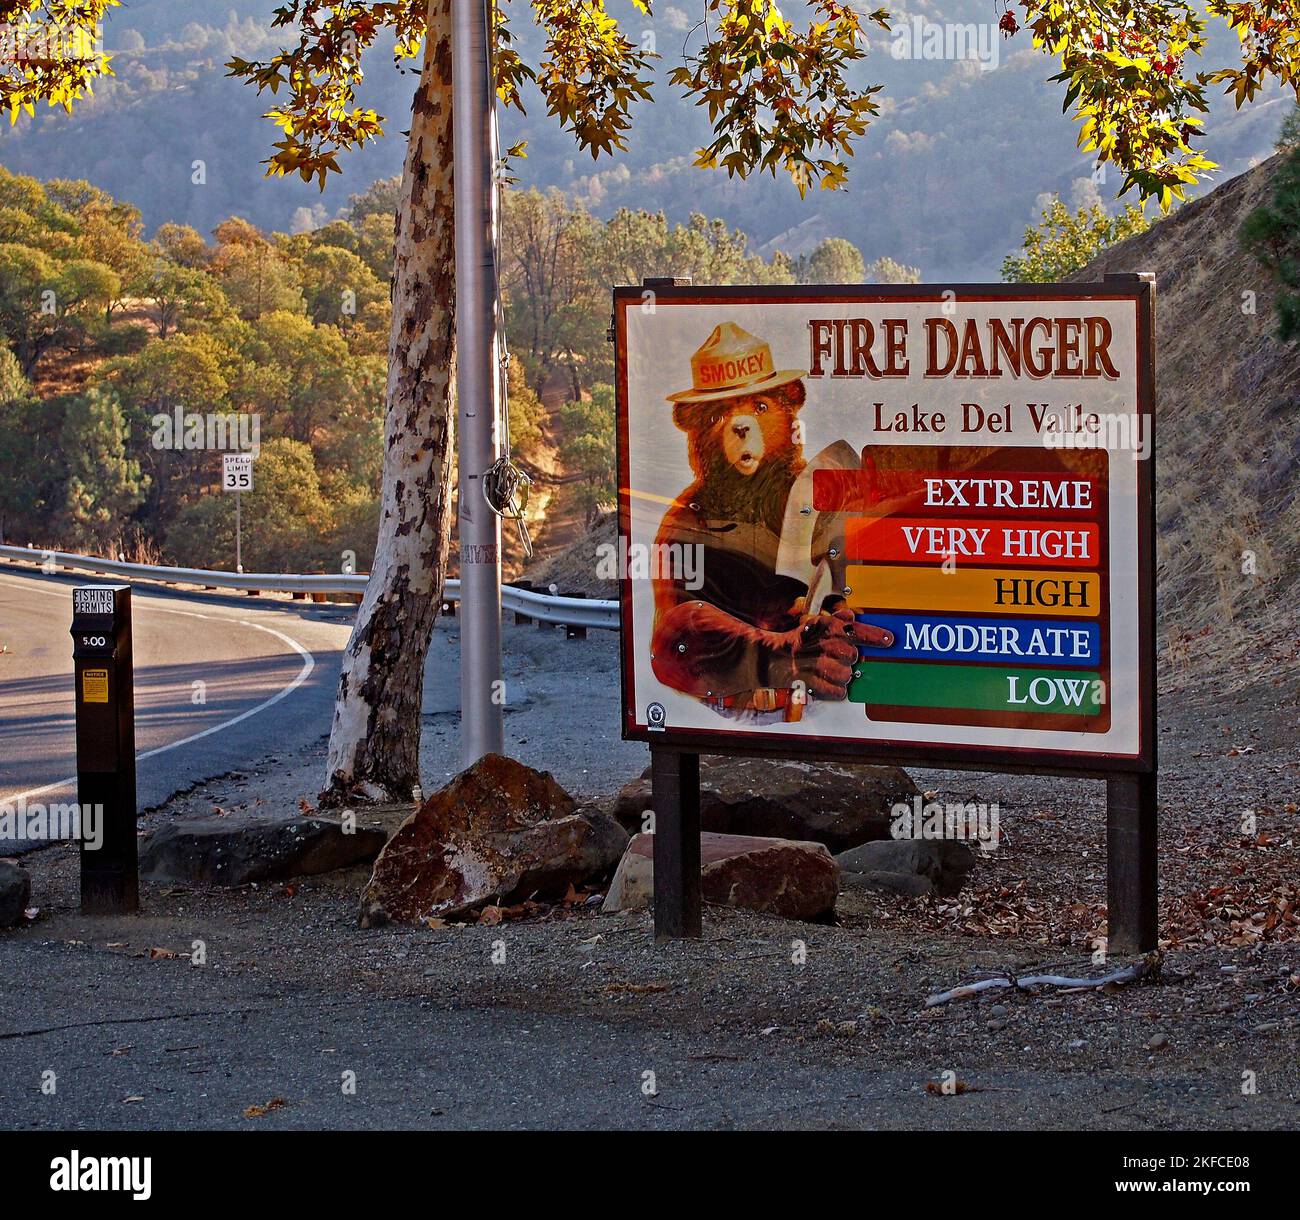 Smokey the Bear moderate fire danger sign at entrance to Lake Del Valle Regional Park in Livermore, California Stock Photo